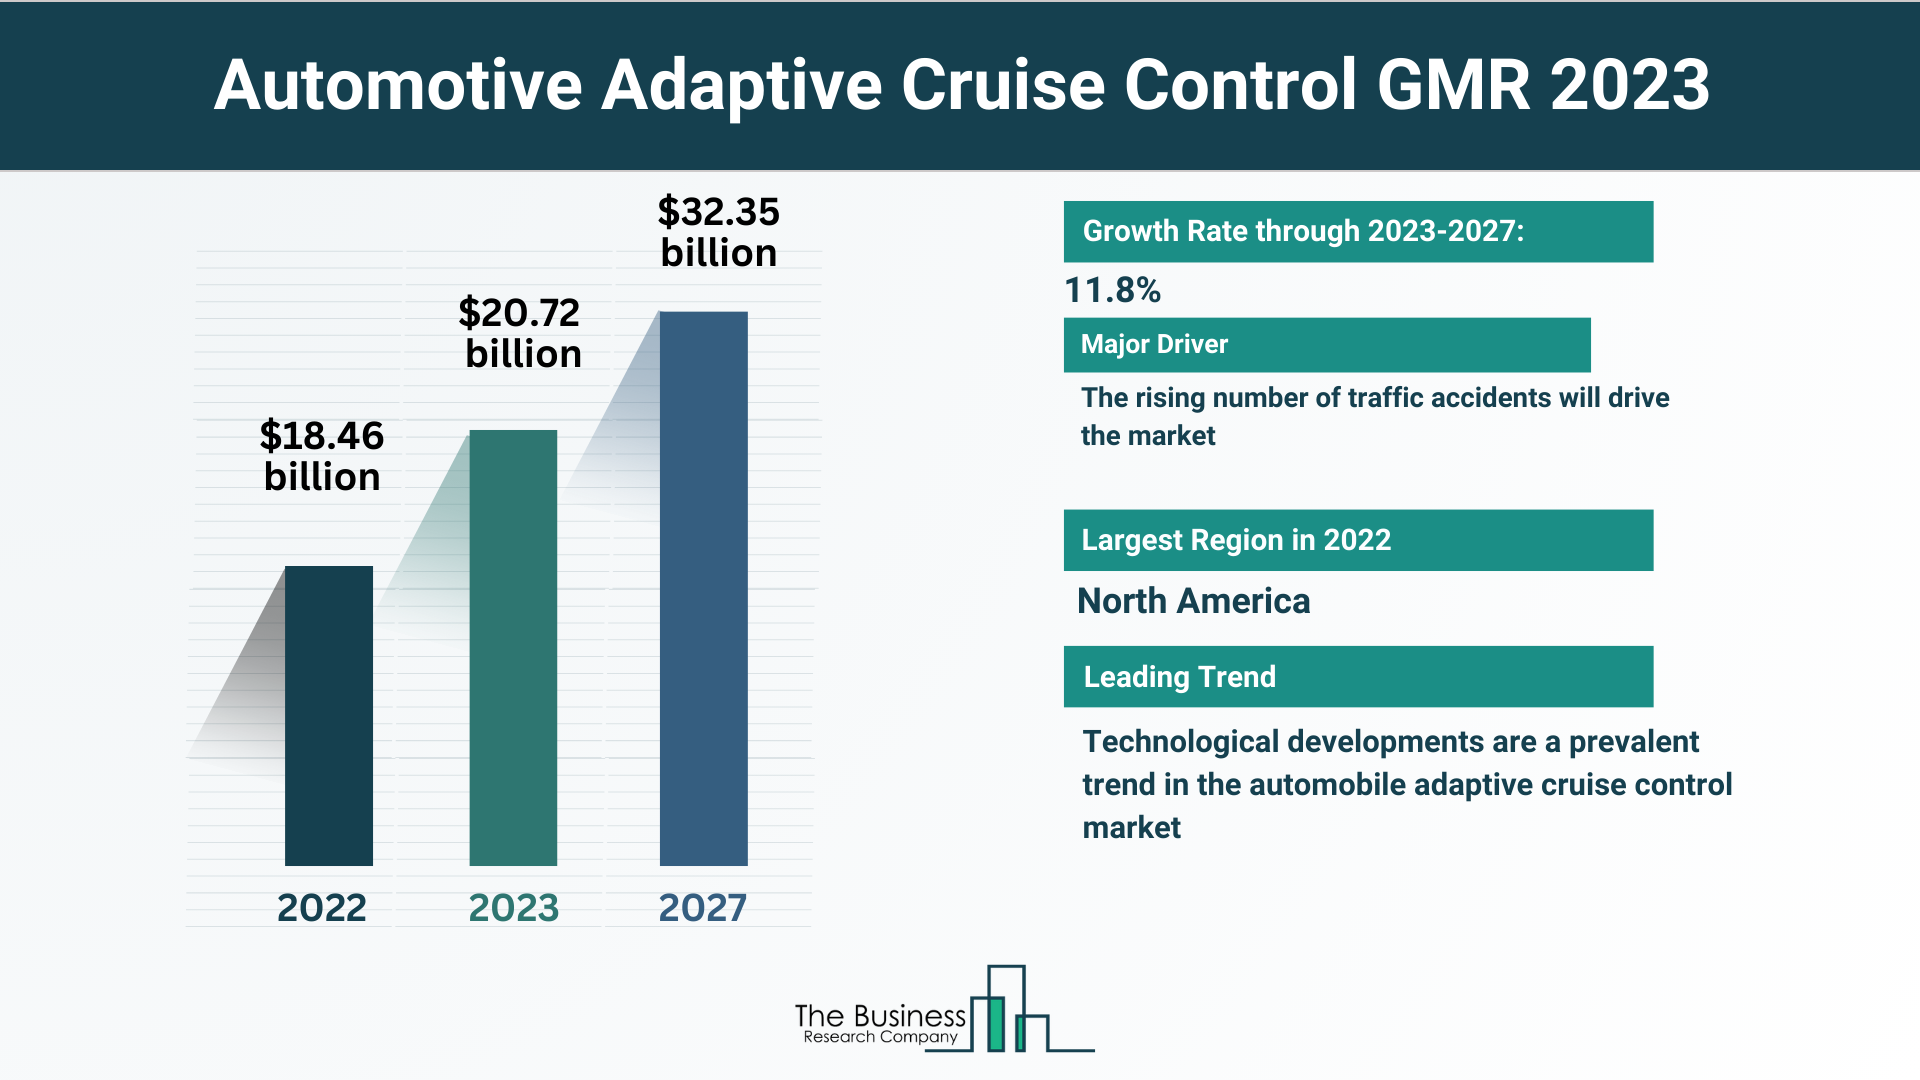 Global Automotive Adaptive Cruise Control Market Analysis: Size, Drivers, Trends, Opportunities And Strategies